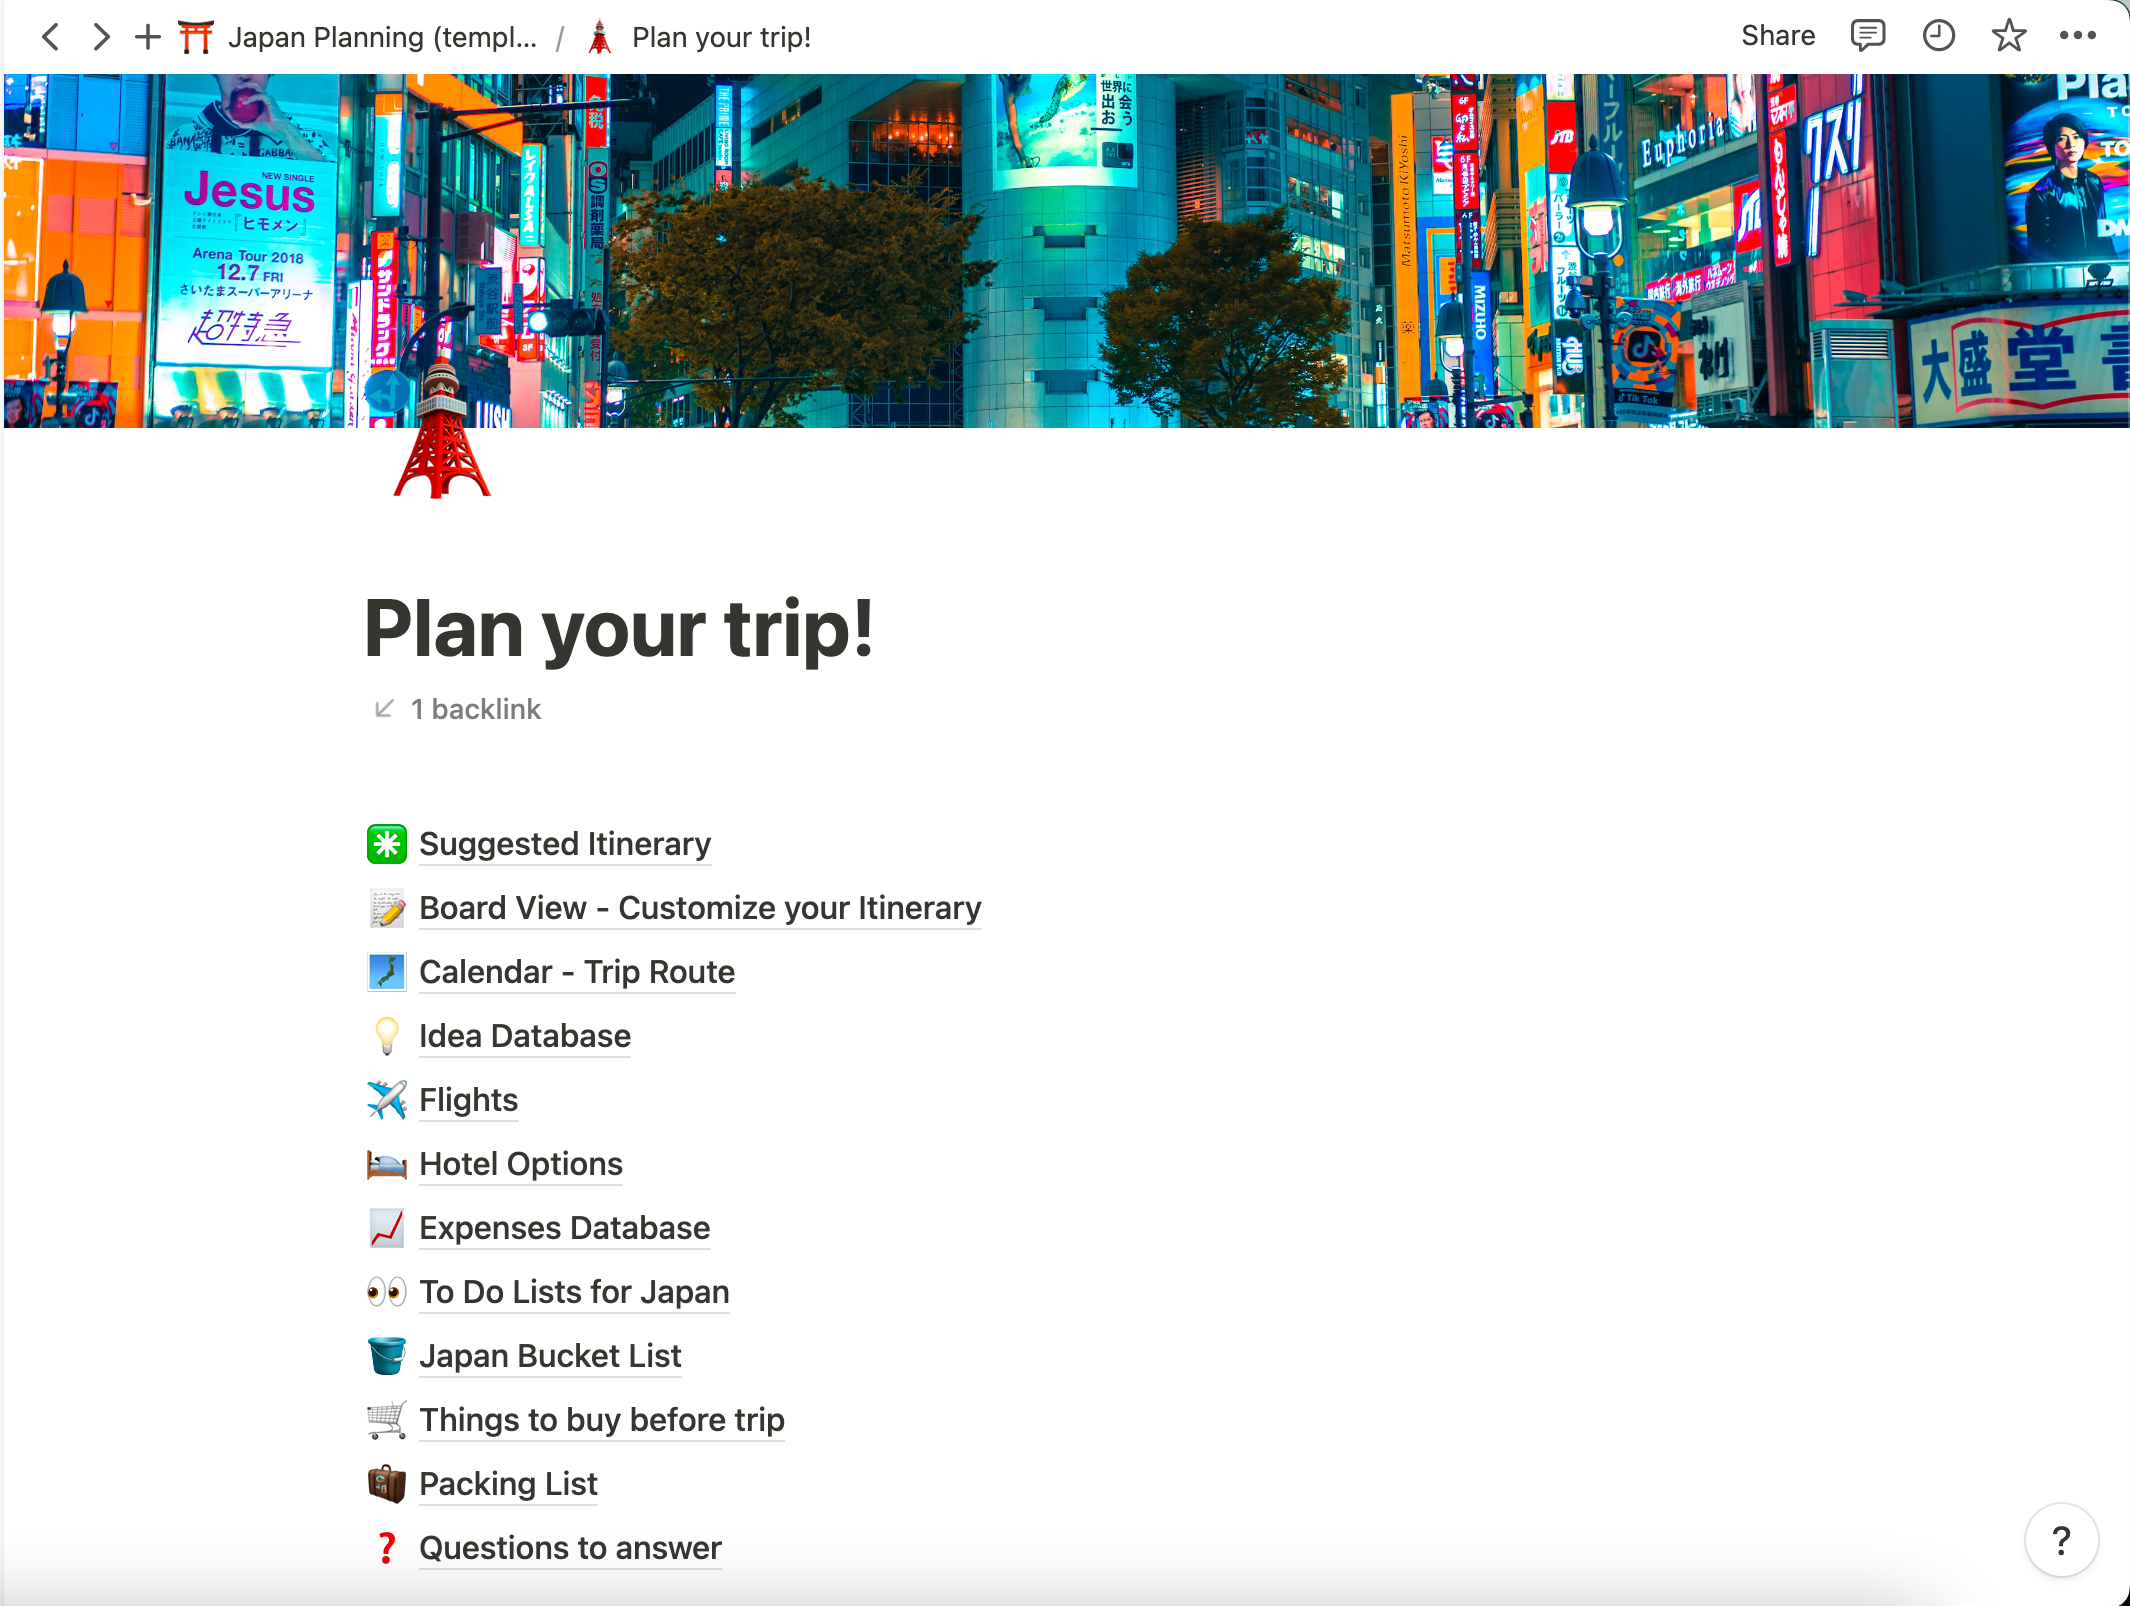 Japan Planning Guide - Plan your trip page